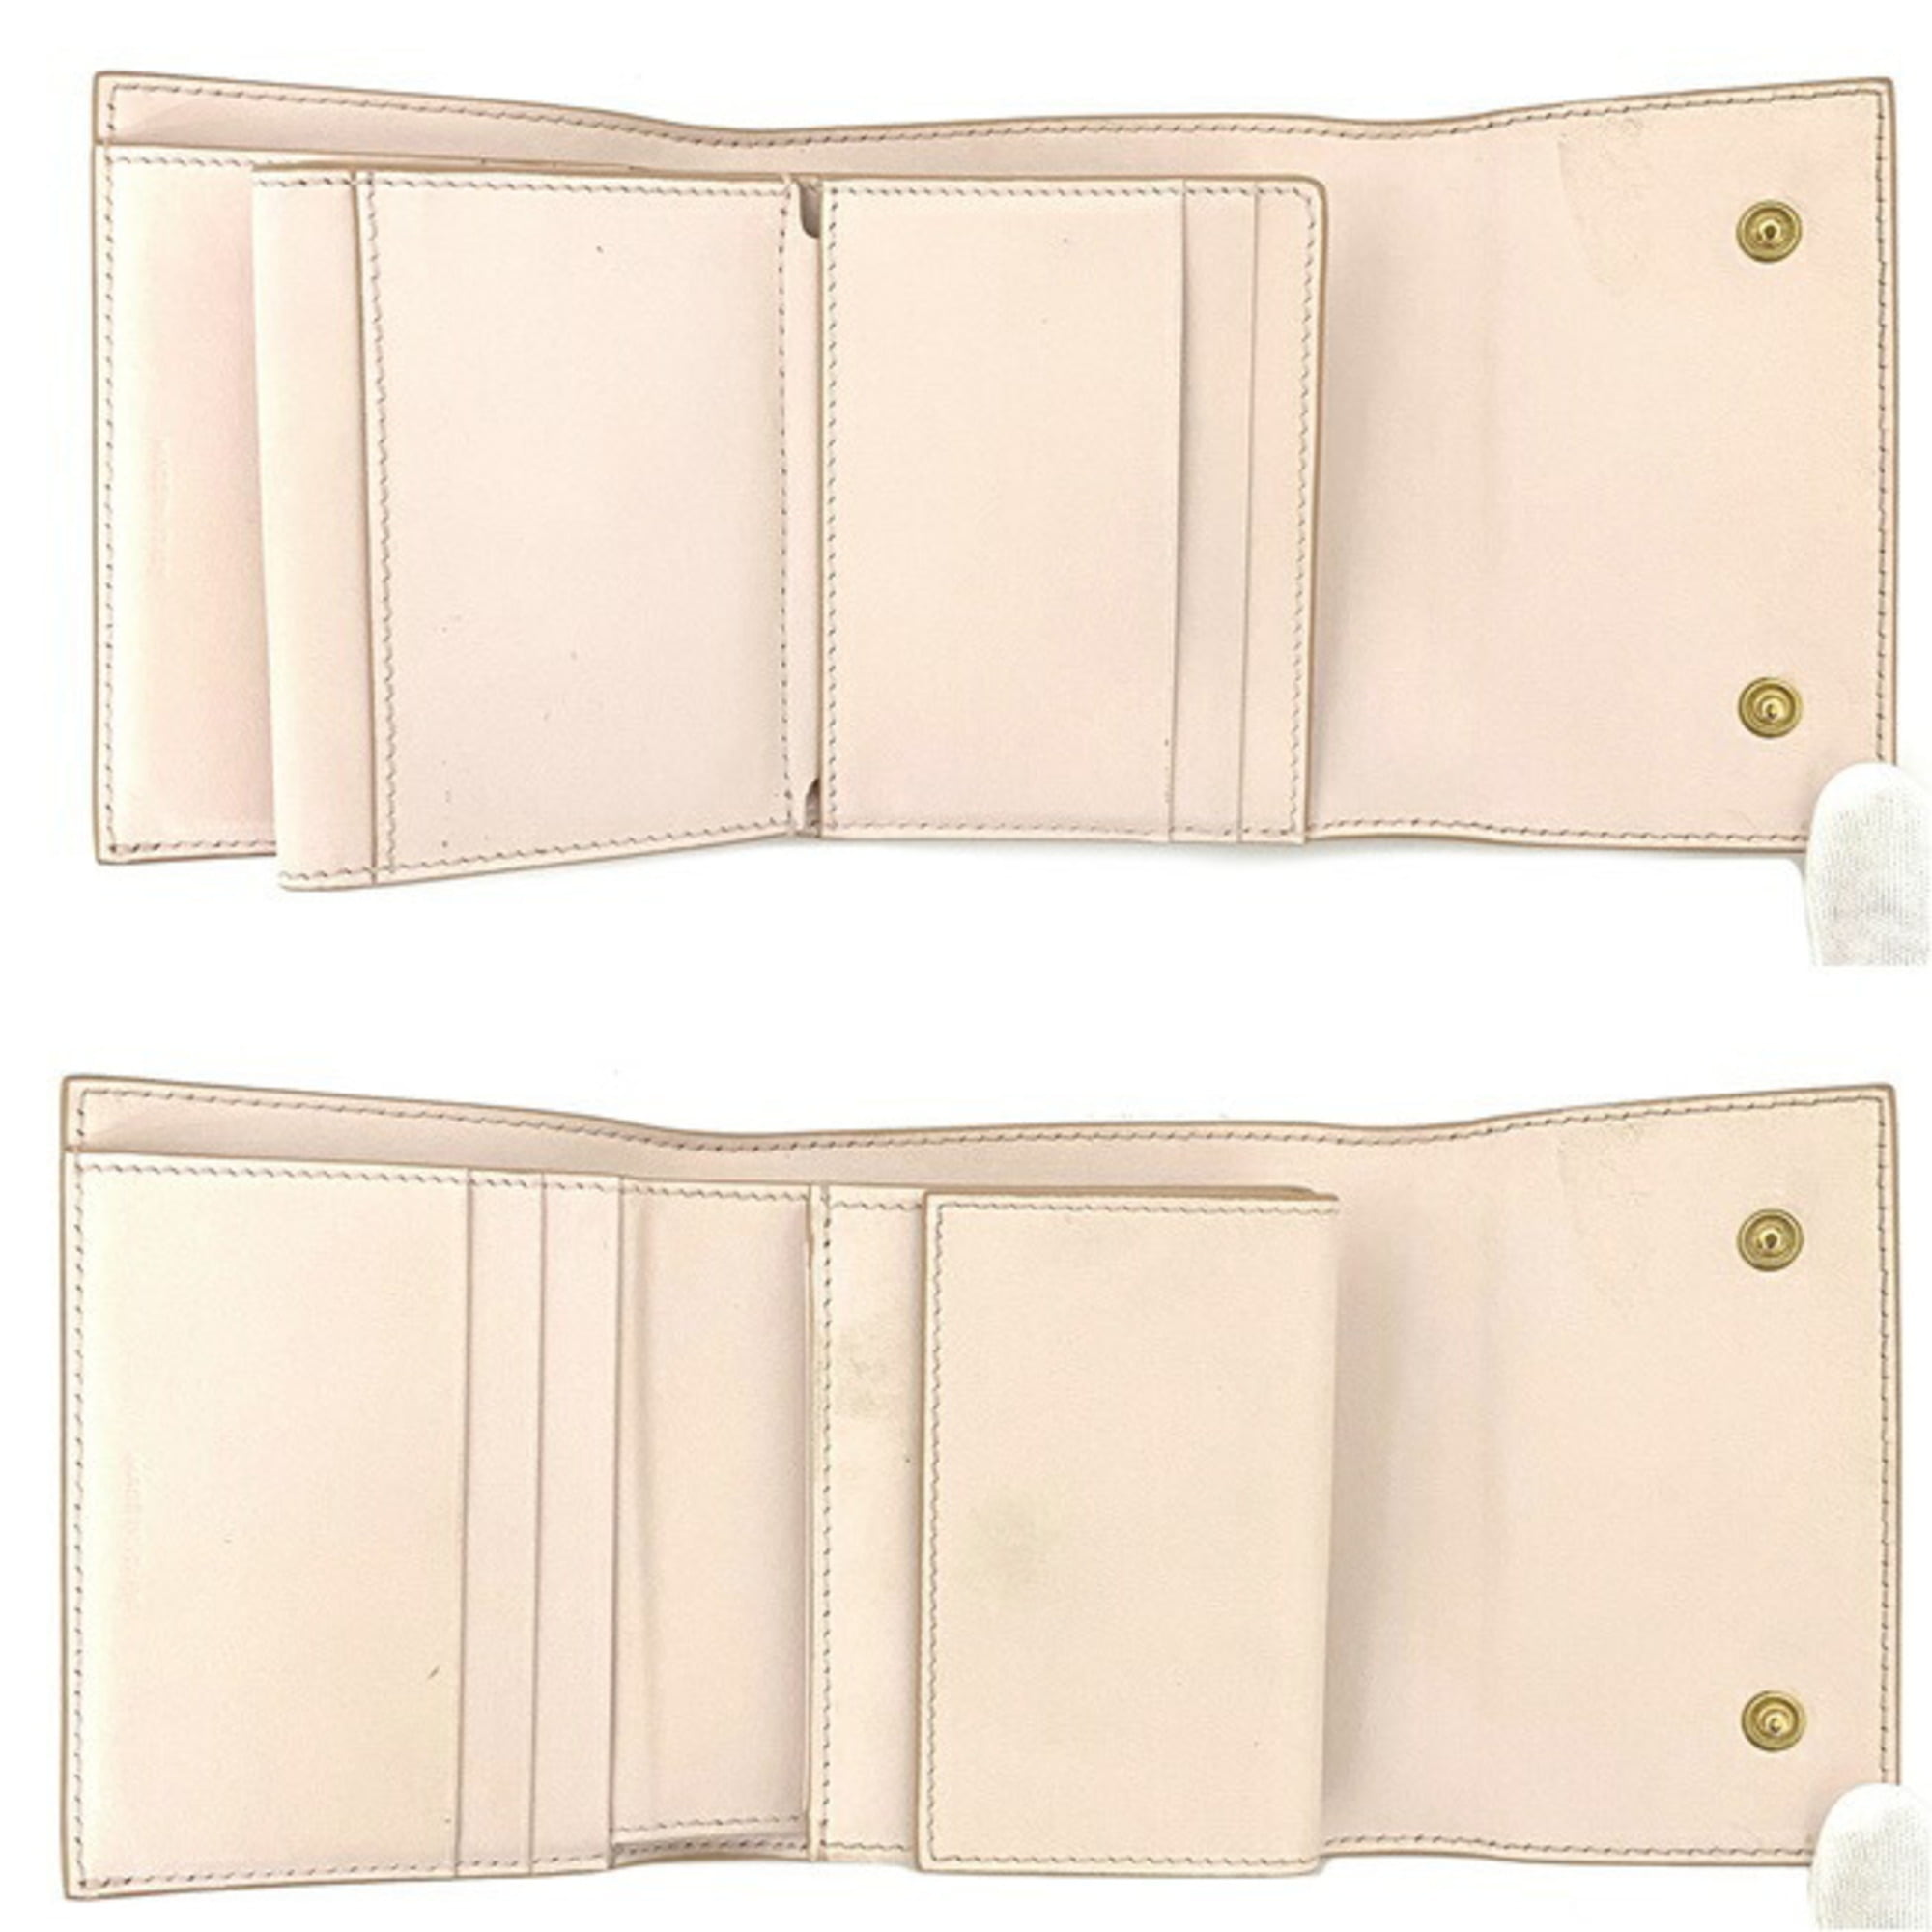 Triomphe leather wallet Celine White in Leather - 35331579